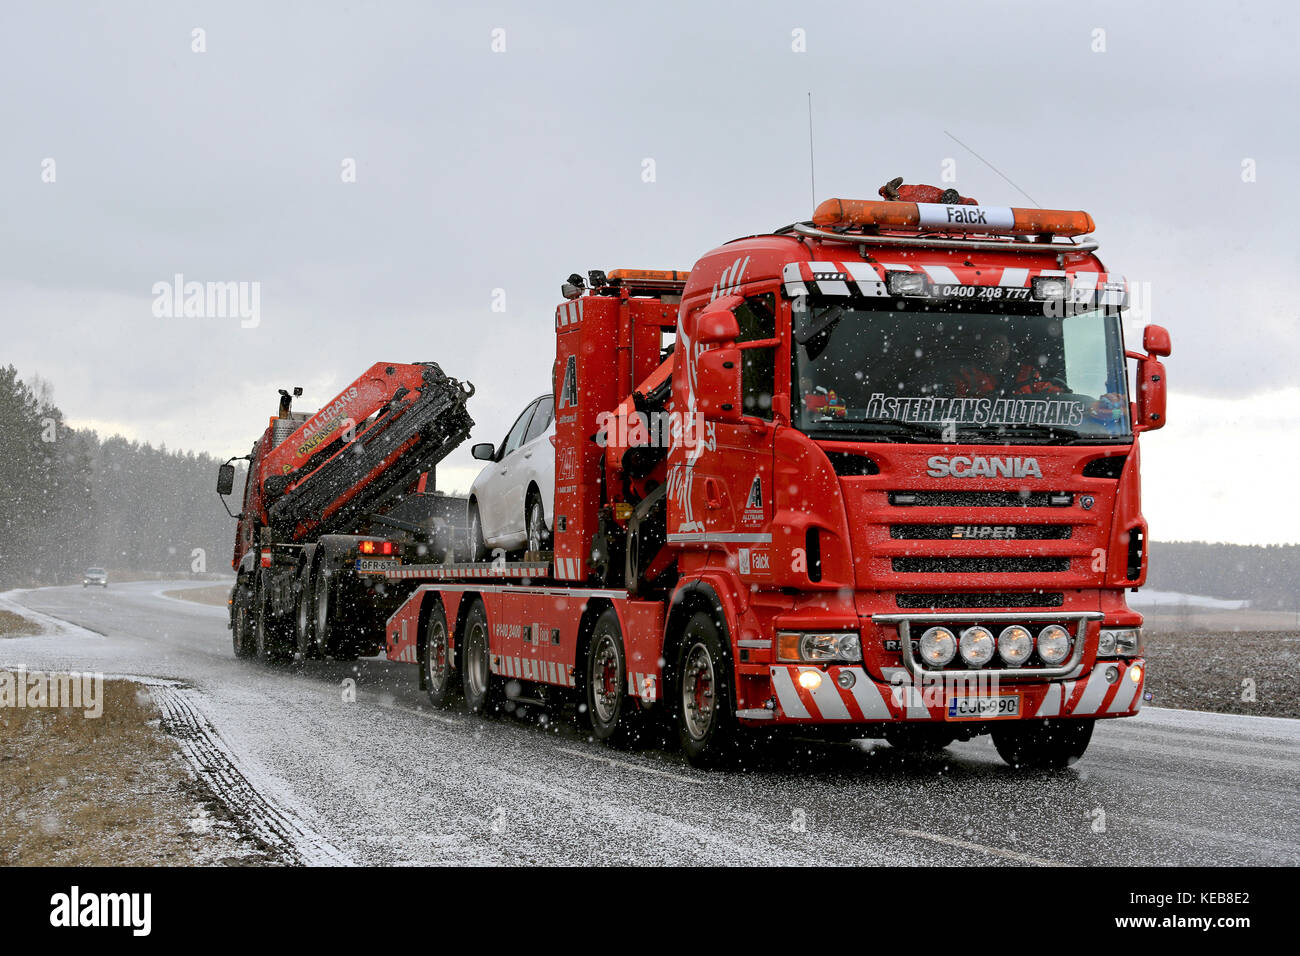 SALO, FINLAND - MARCH 20, 2016: Truck and car are being towed by a heavy duty tow truck in snowfall. Heavy duty towing requires special skills and equ Stock Photo